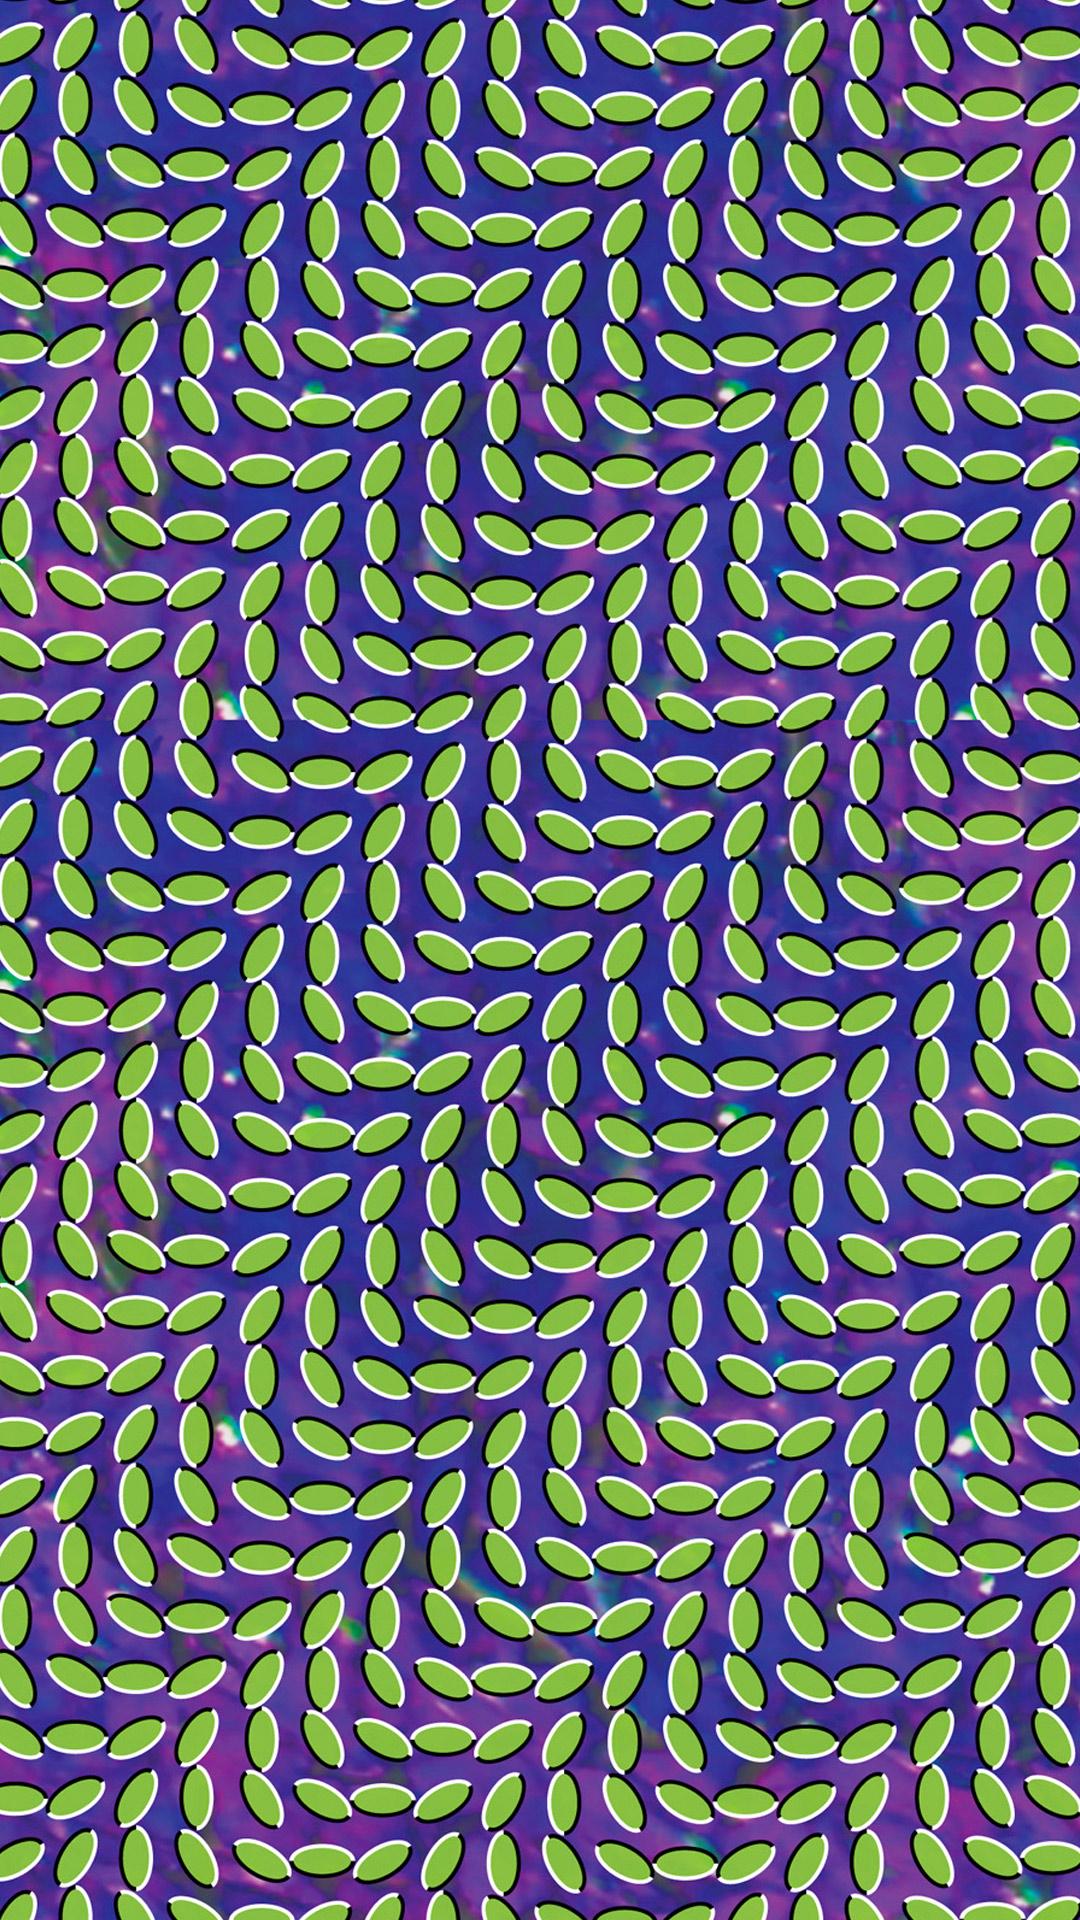 Trippy Optical Illusions That Appear to be Animated Use as Phone